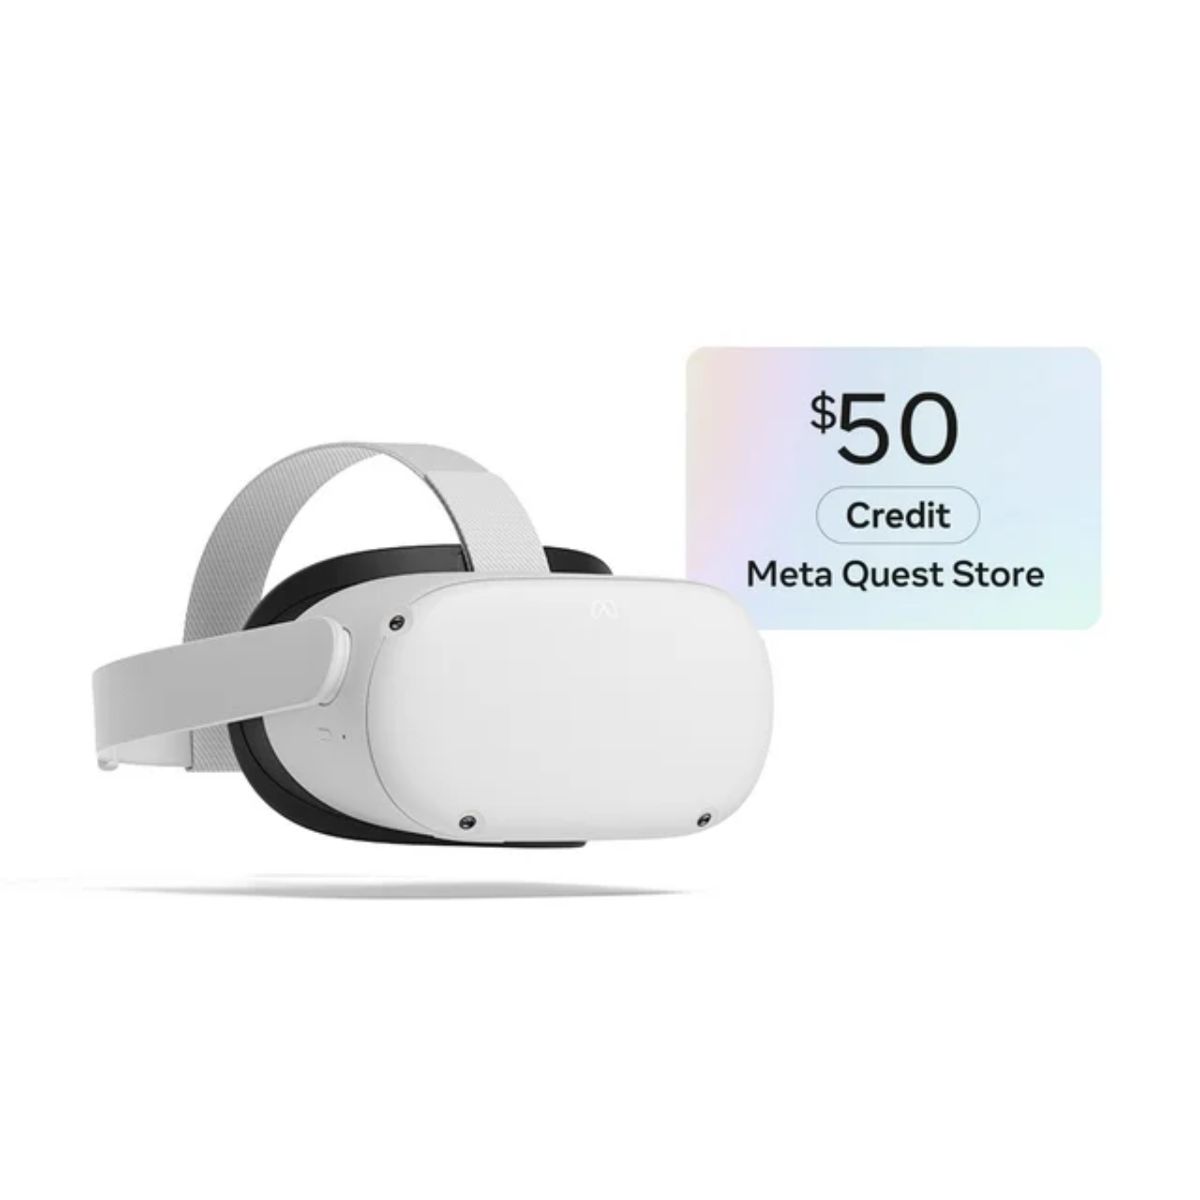 An image showing the Meta Quest 2 headset sitting next to a graphic of a Meta Quest Store gift card with $50 written on it.